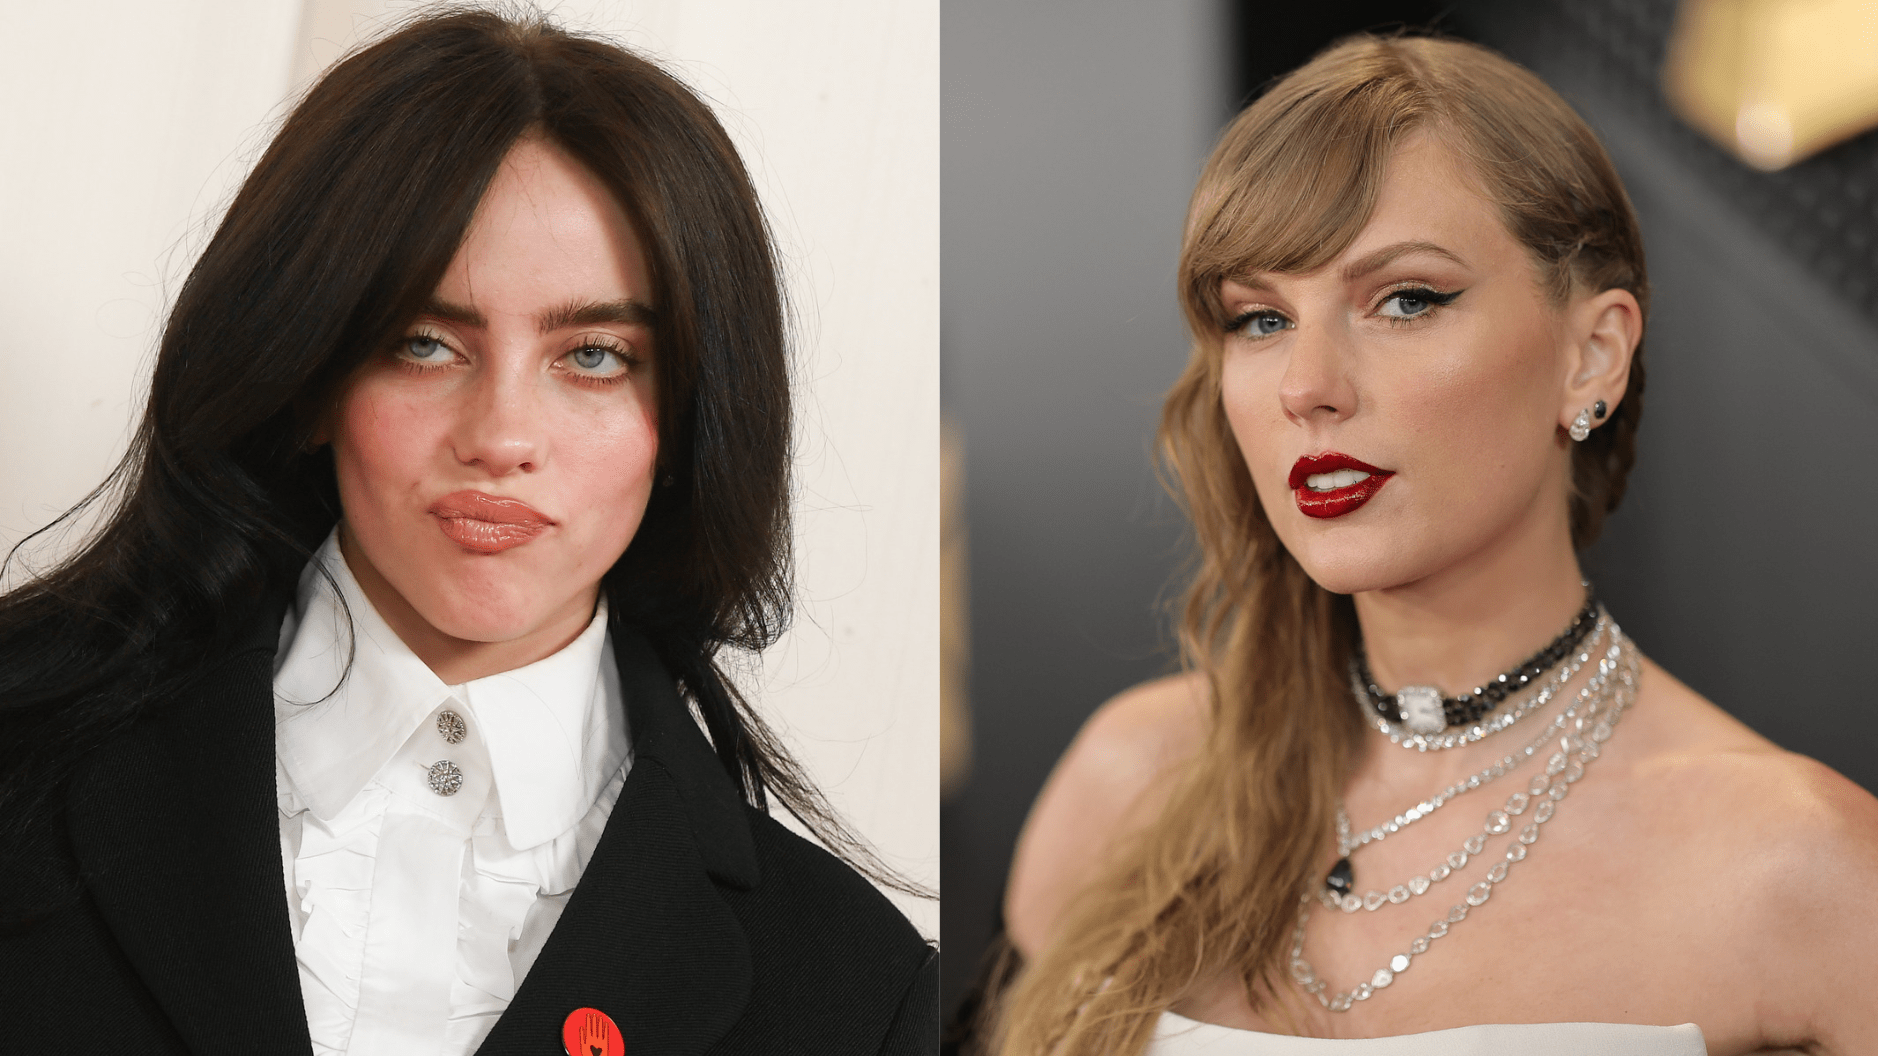 Billie Eillish Accused of Shading Taylor Swift With Vinyl Record Comment